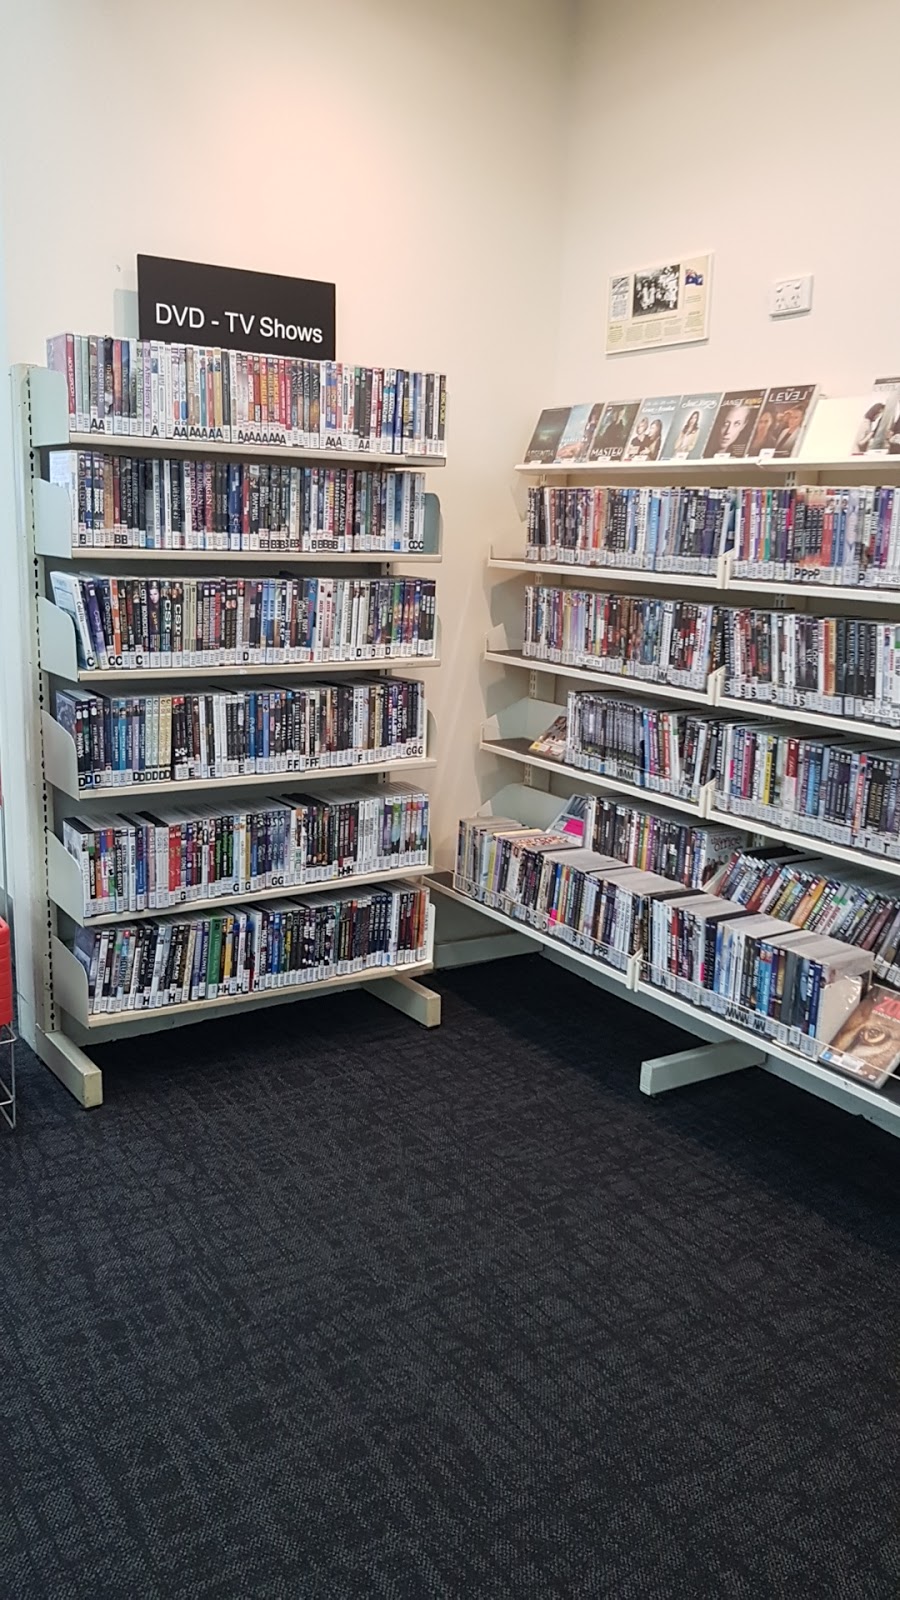 Epping Branch Library | Chambers Ct, Epping NSW 2121, Australia | Phone: (02) 9806 5843